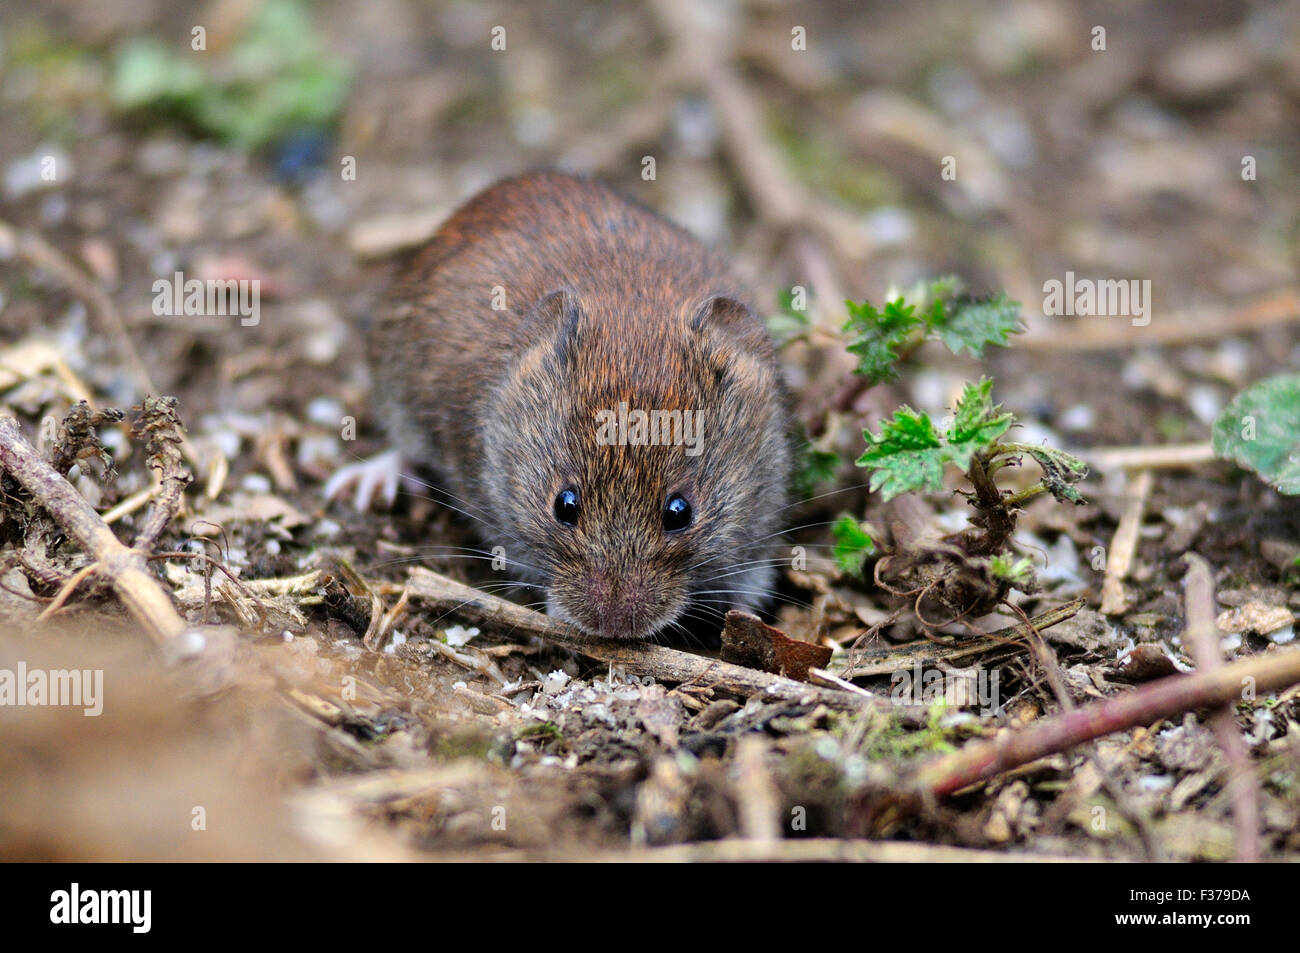 A bank vole on the ground UK Stock Photo